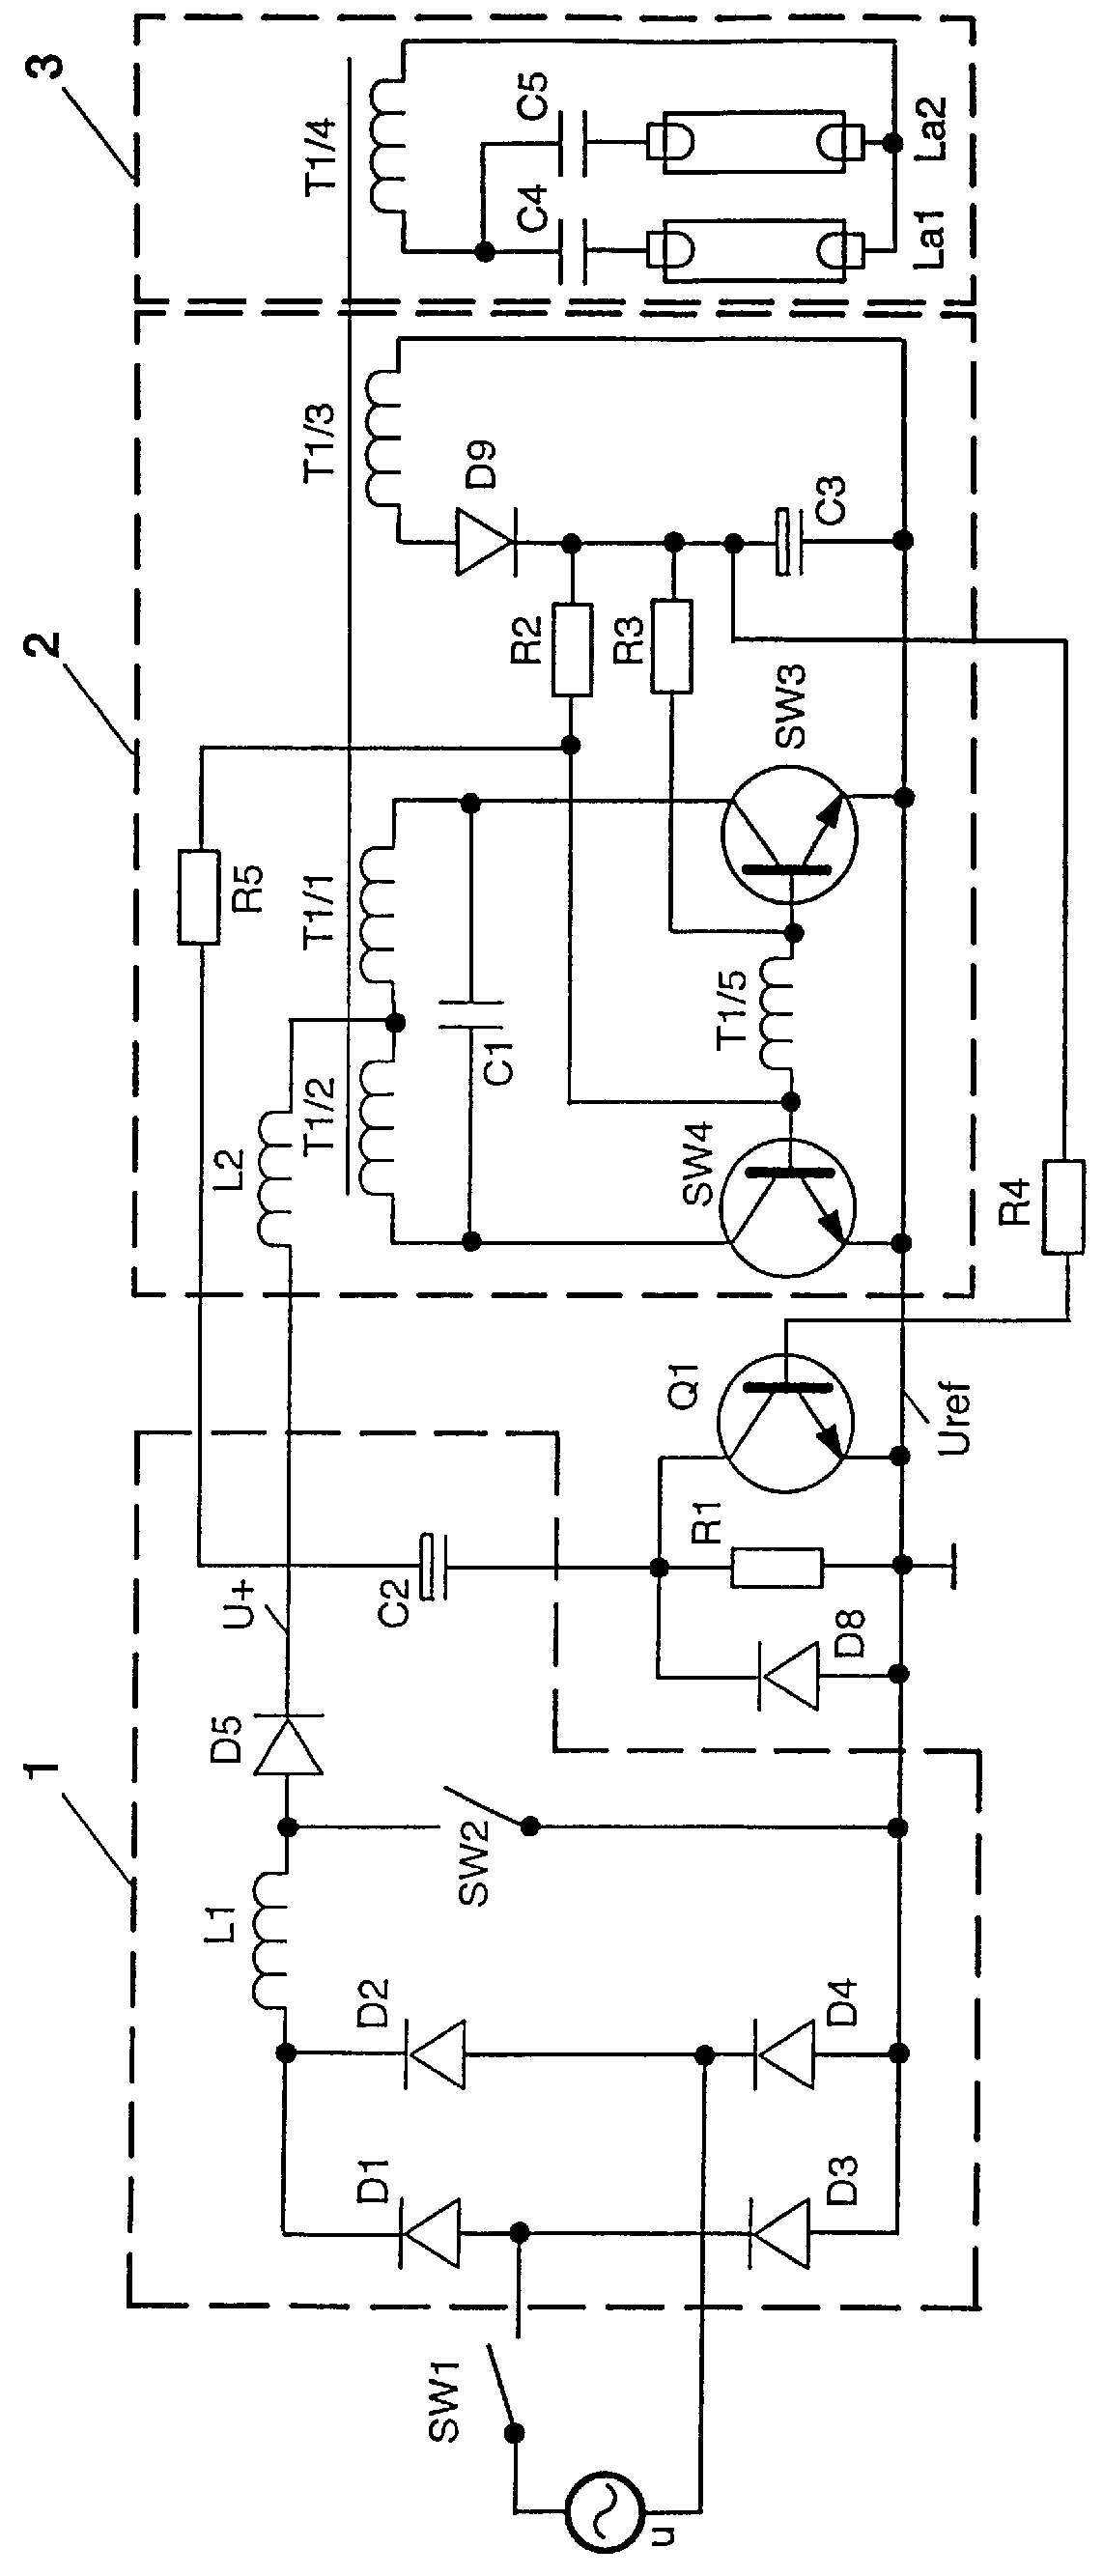 Electronic ballast with inrush current limiting